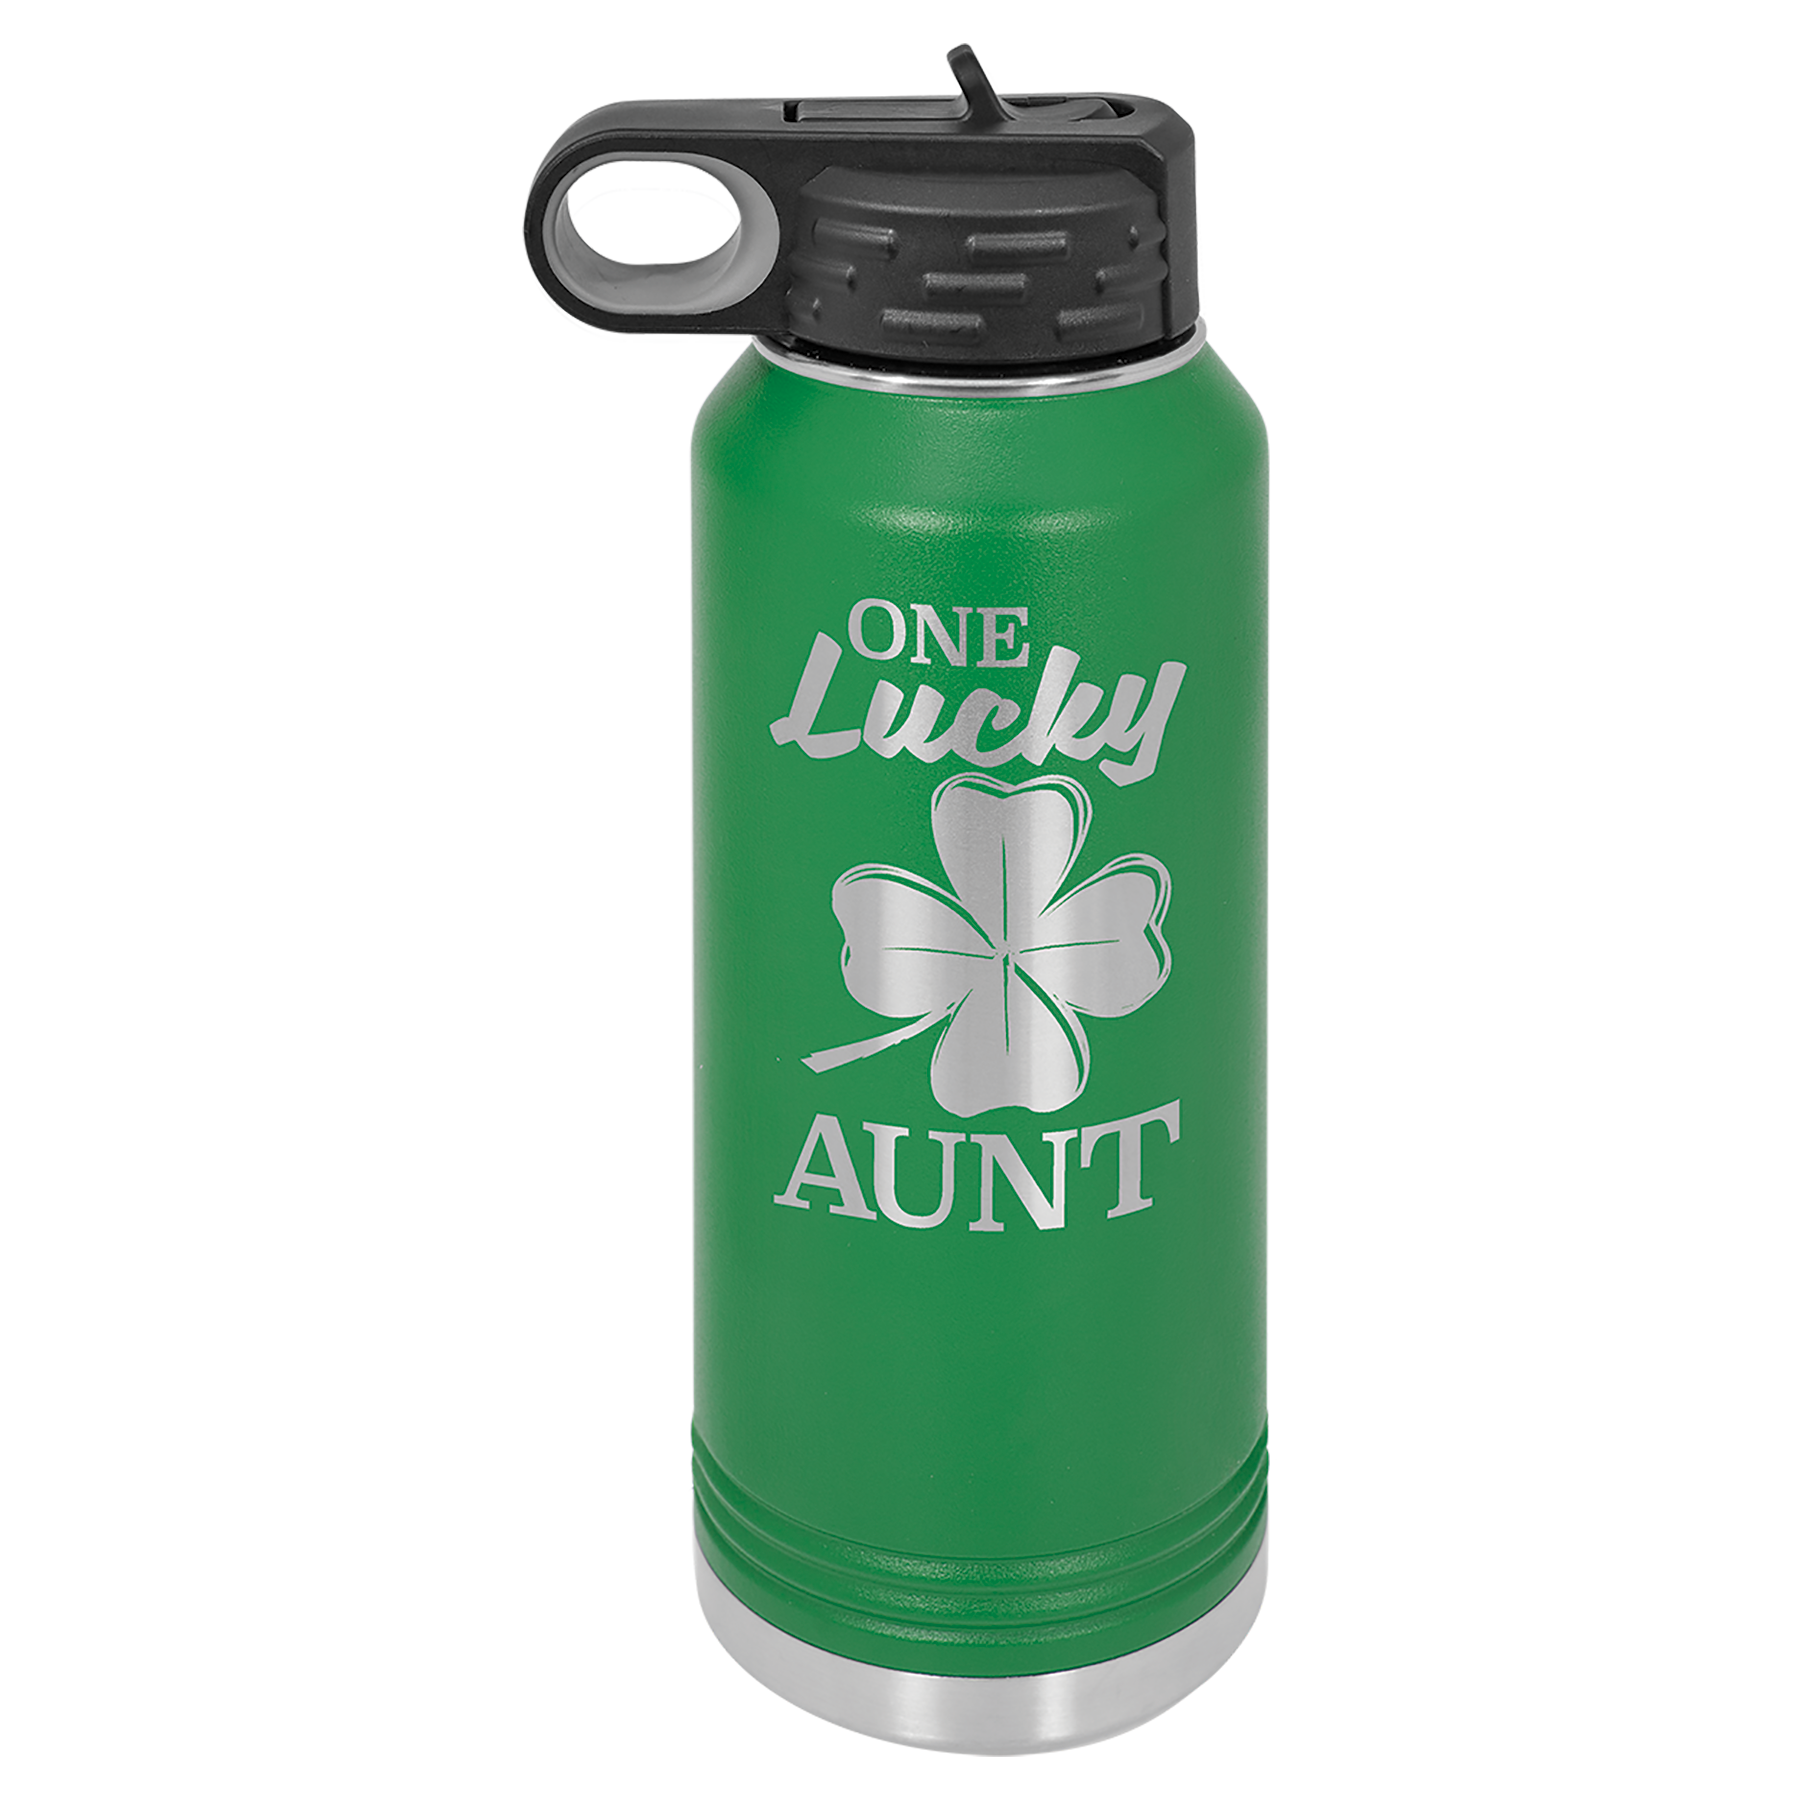 Personalized 32oz. Stainless Steel Water Bottle with Flip Top and Straw, Engraved with Custom Logo, Name or Design